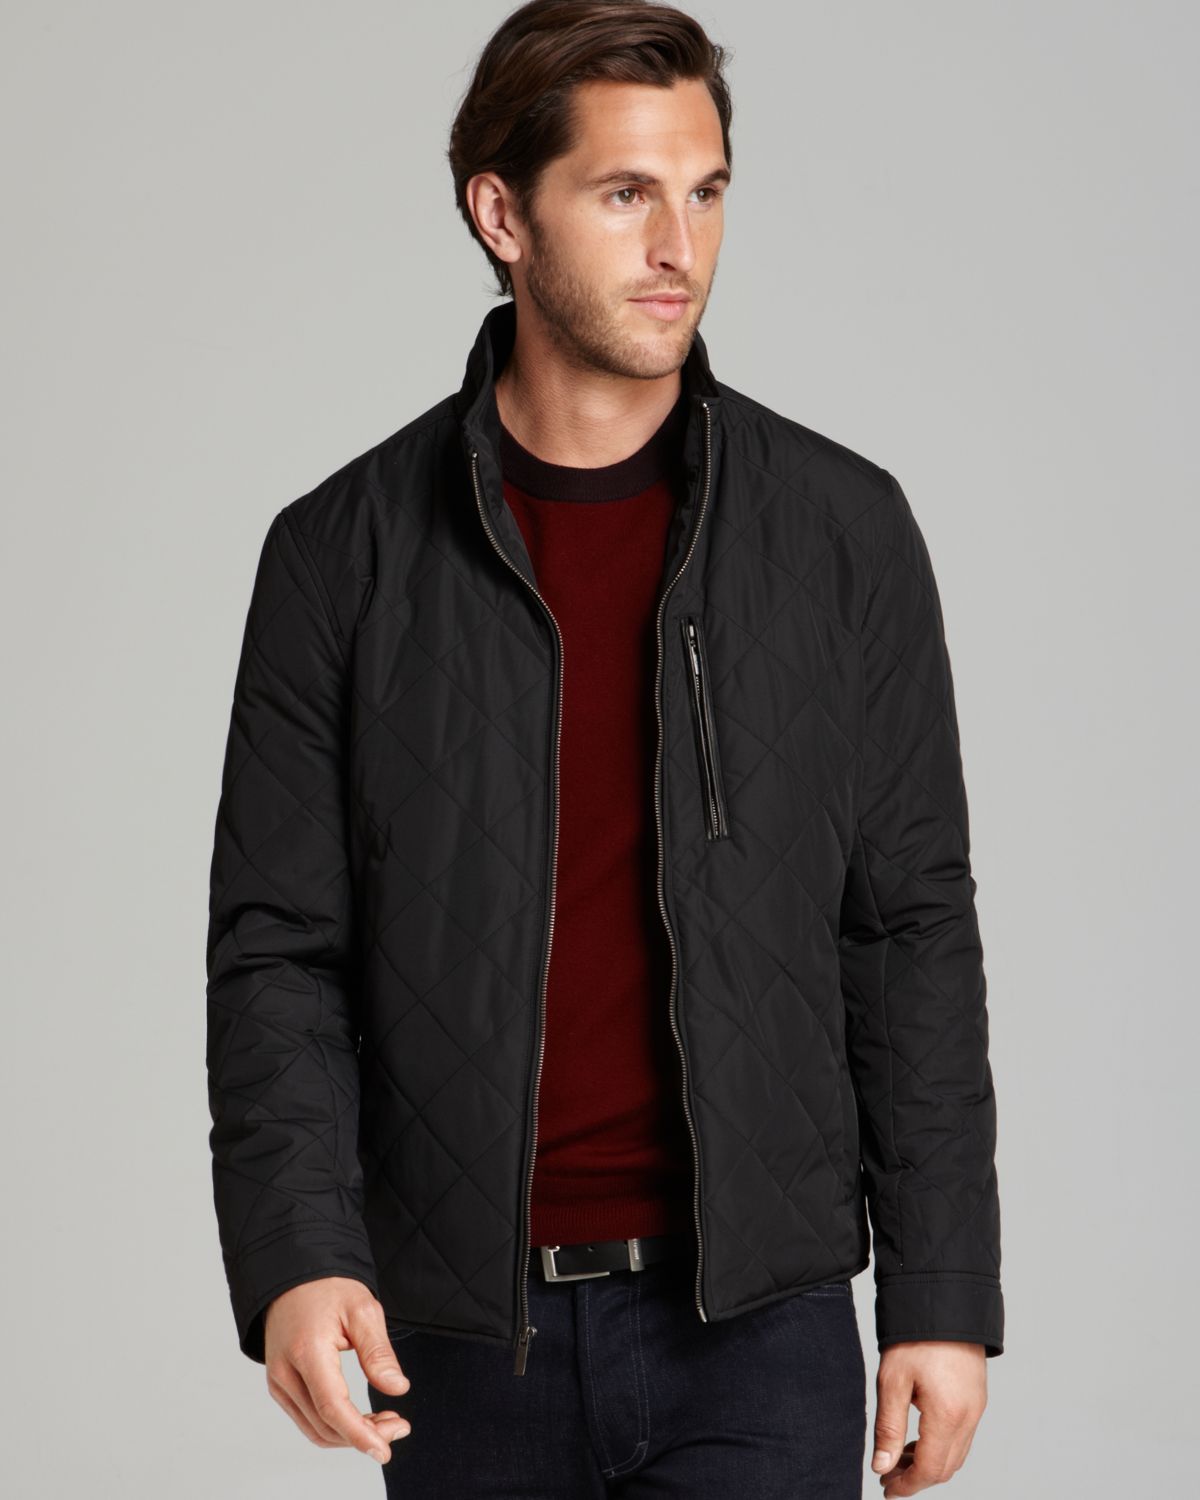 Lyst - Cole haan Quilted Nylon Jacket in Black for Men